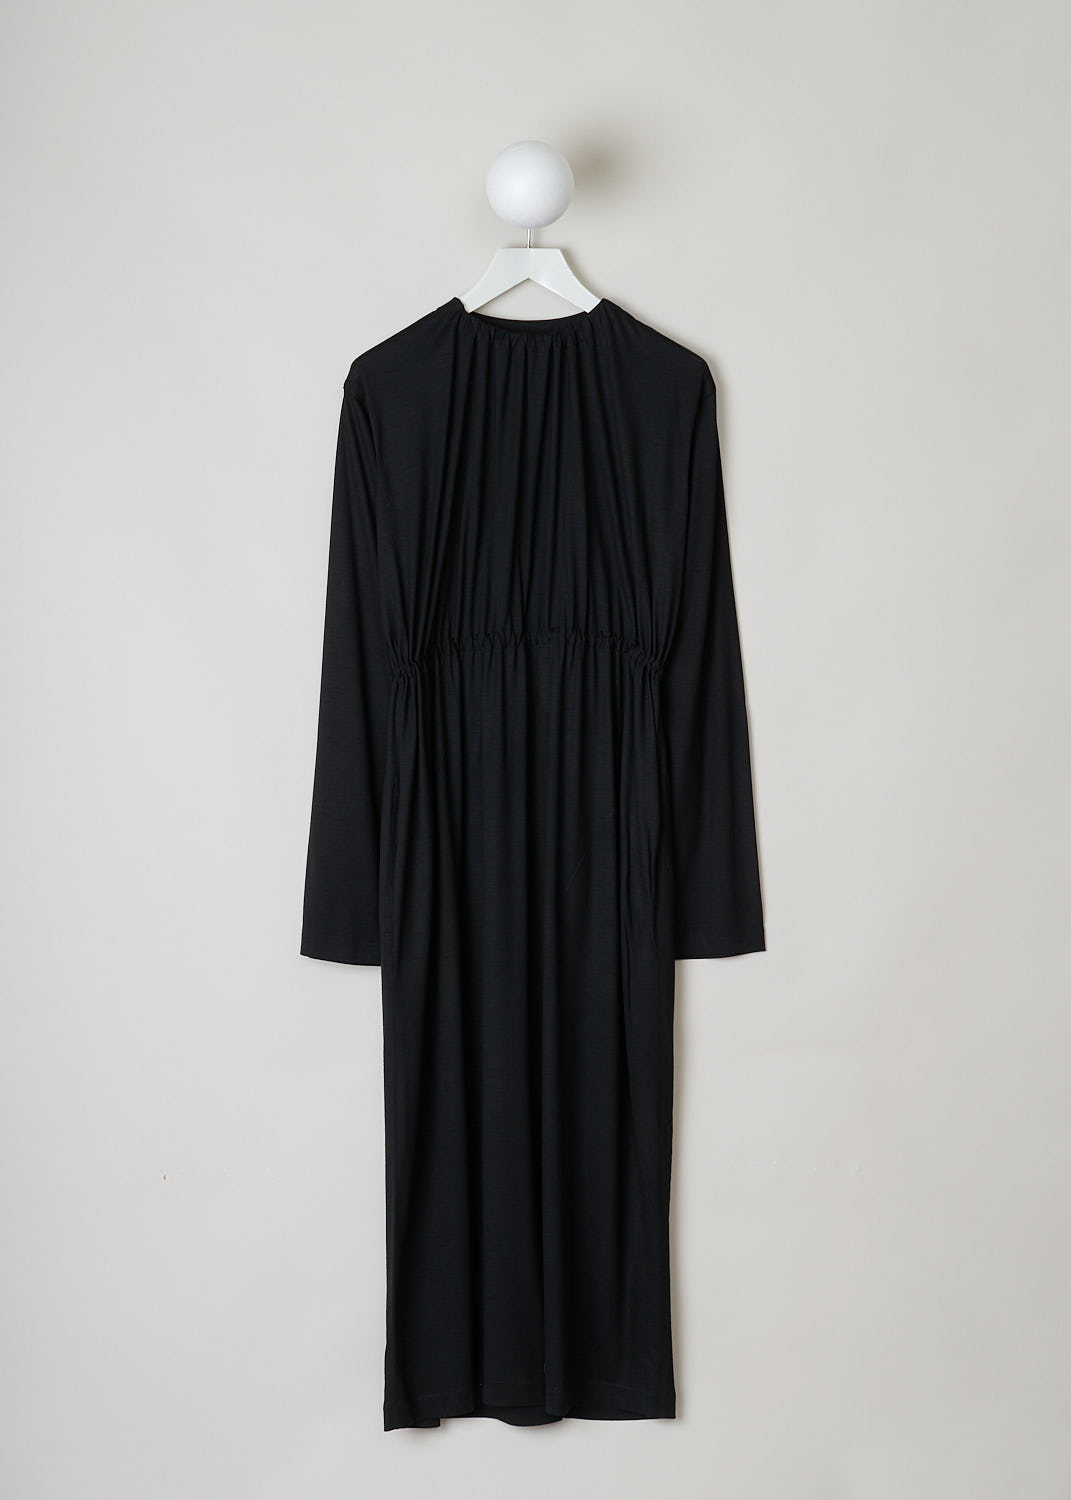 SOFIE Dâ€™HOORE, LONG SLEEVE BLACK DRESS, DARA_WOJE_BLACK, Black, Front, This black maxi dress features a gathered elasticated neckline. The waist is also elasticated, cinching in the waist. Slant pockets can be found concealed in the seam.
